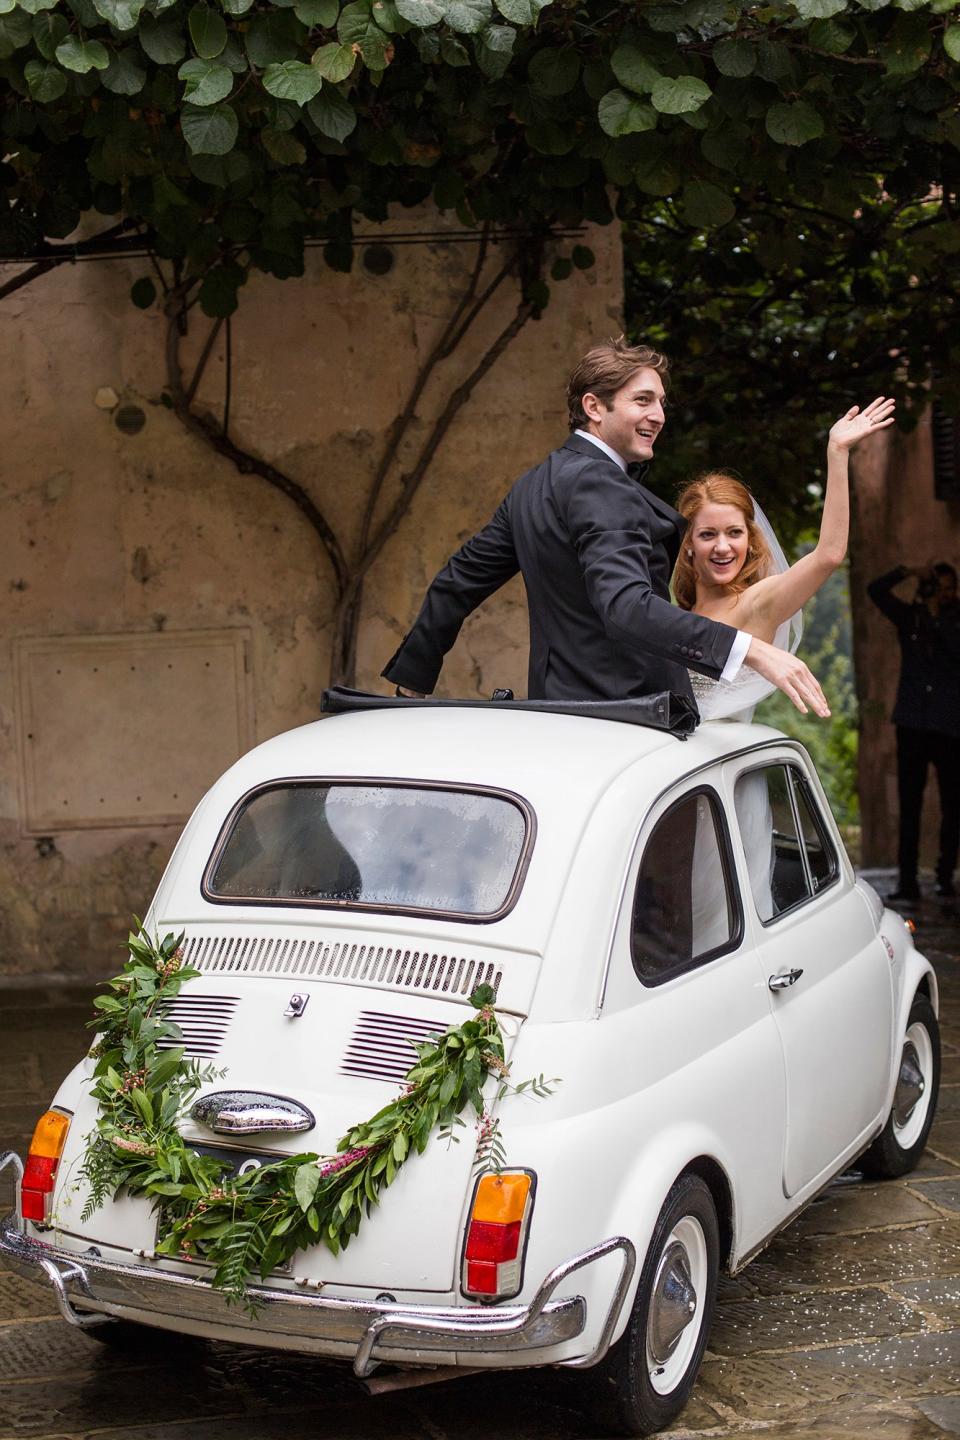 That’s Amore: This Couple Had a Romantic, Rainy Wedding at a Tiny Chapel in Tuscany